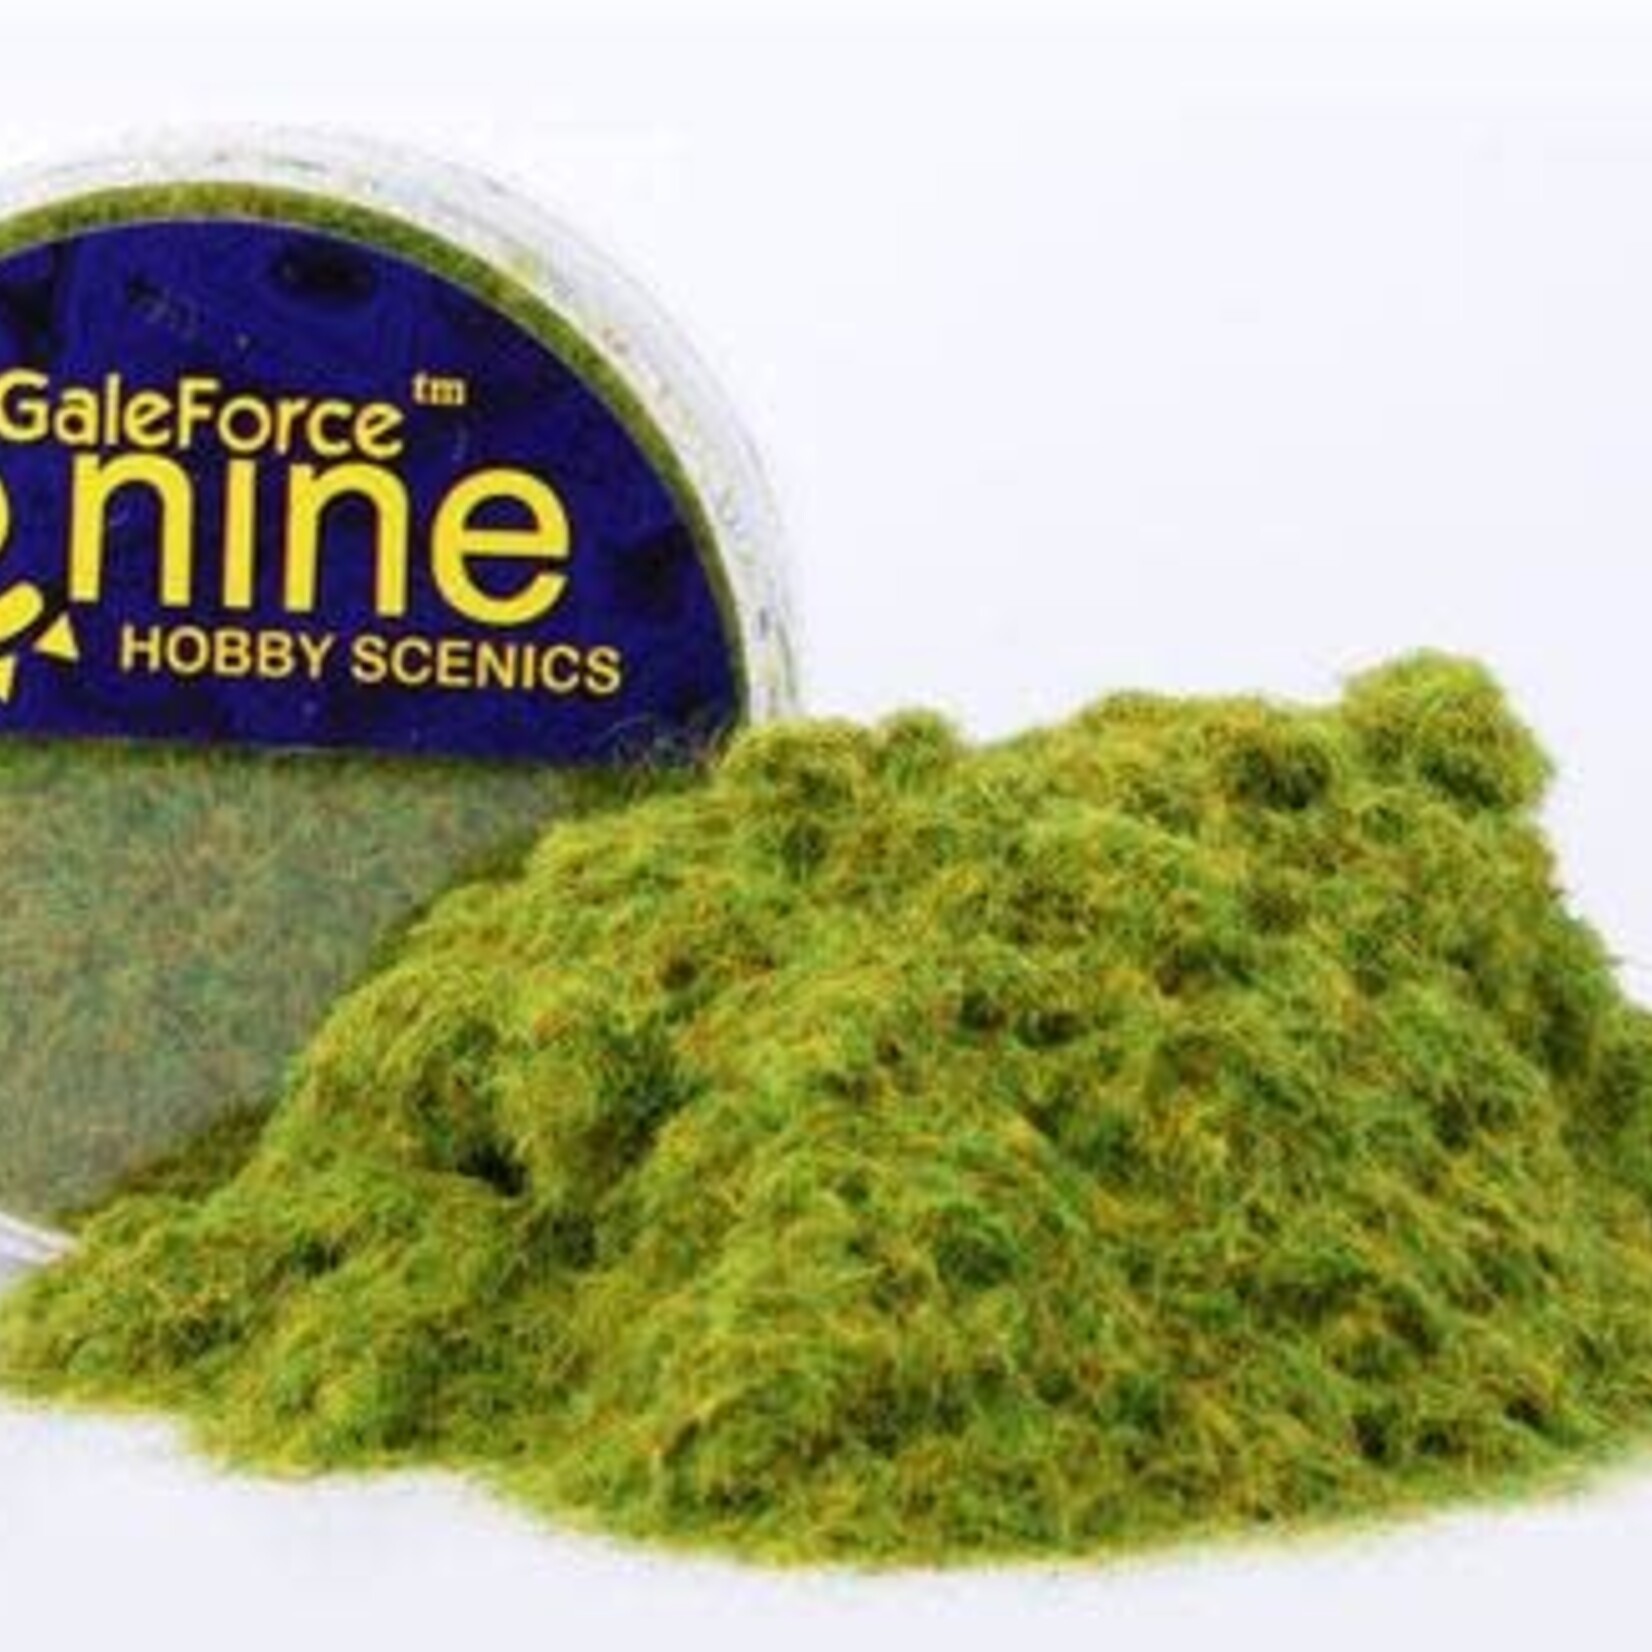 Gale Force 9 Hobby Round: Green Static Grass